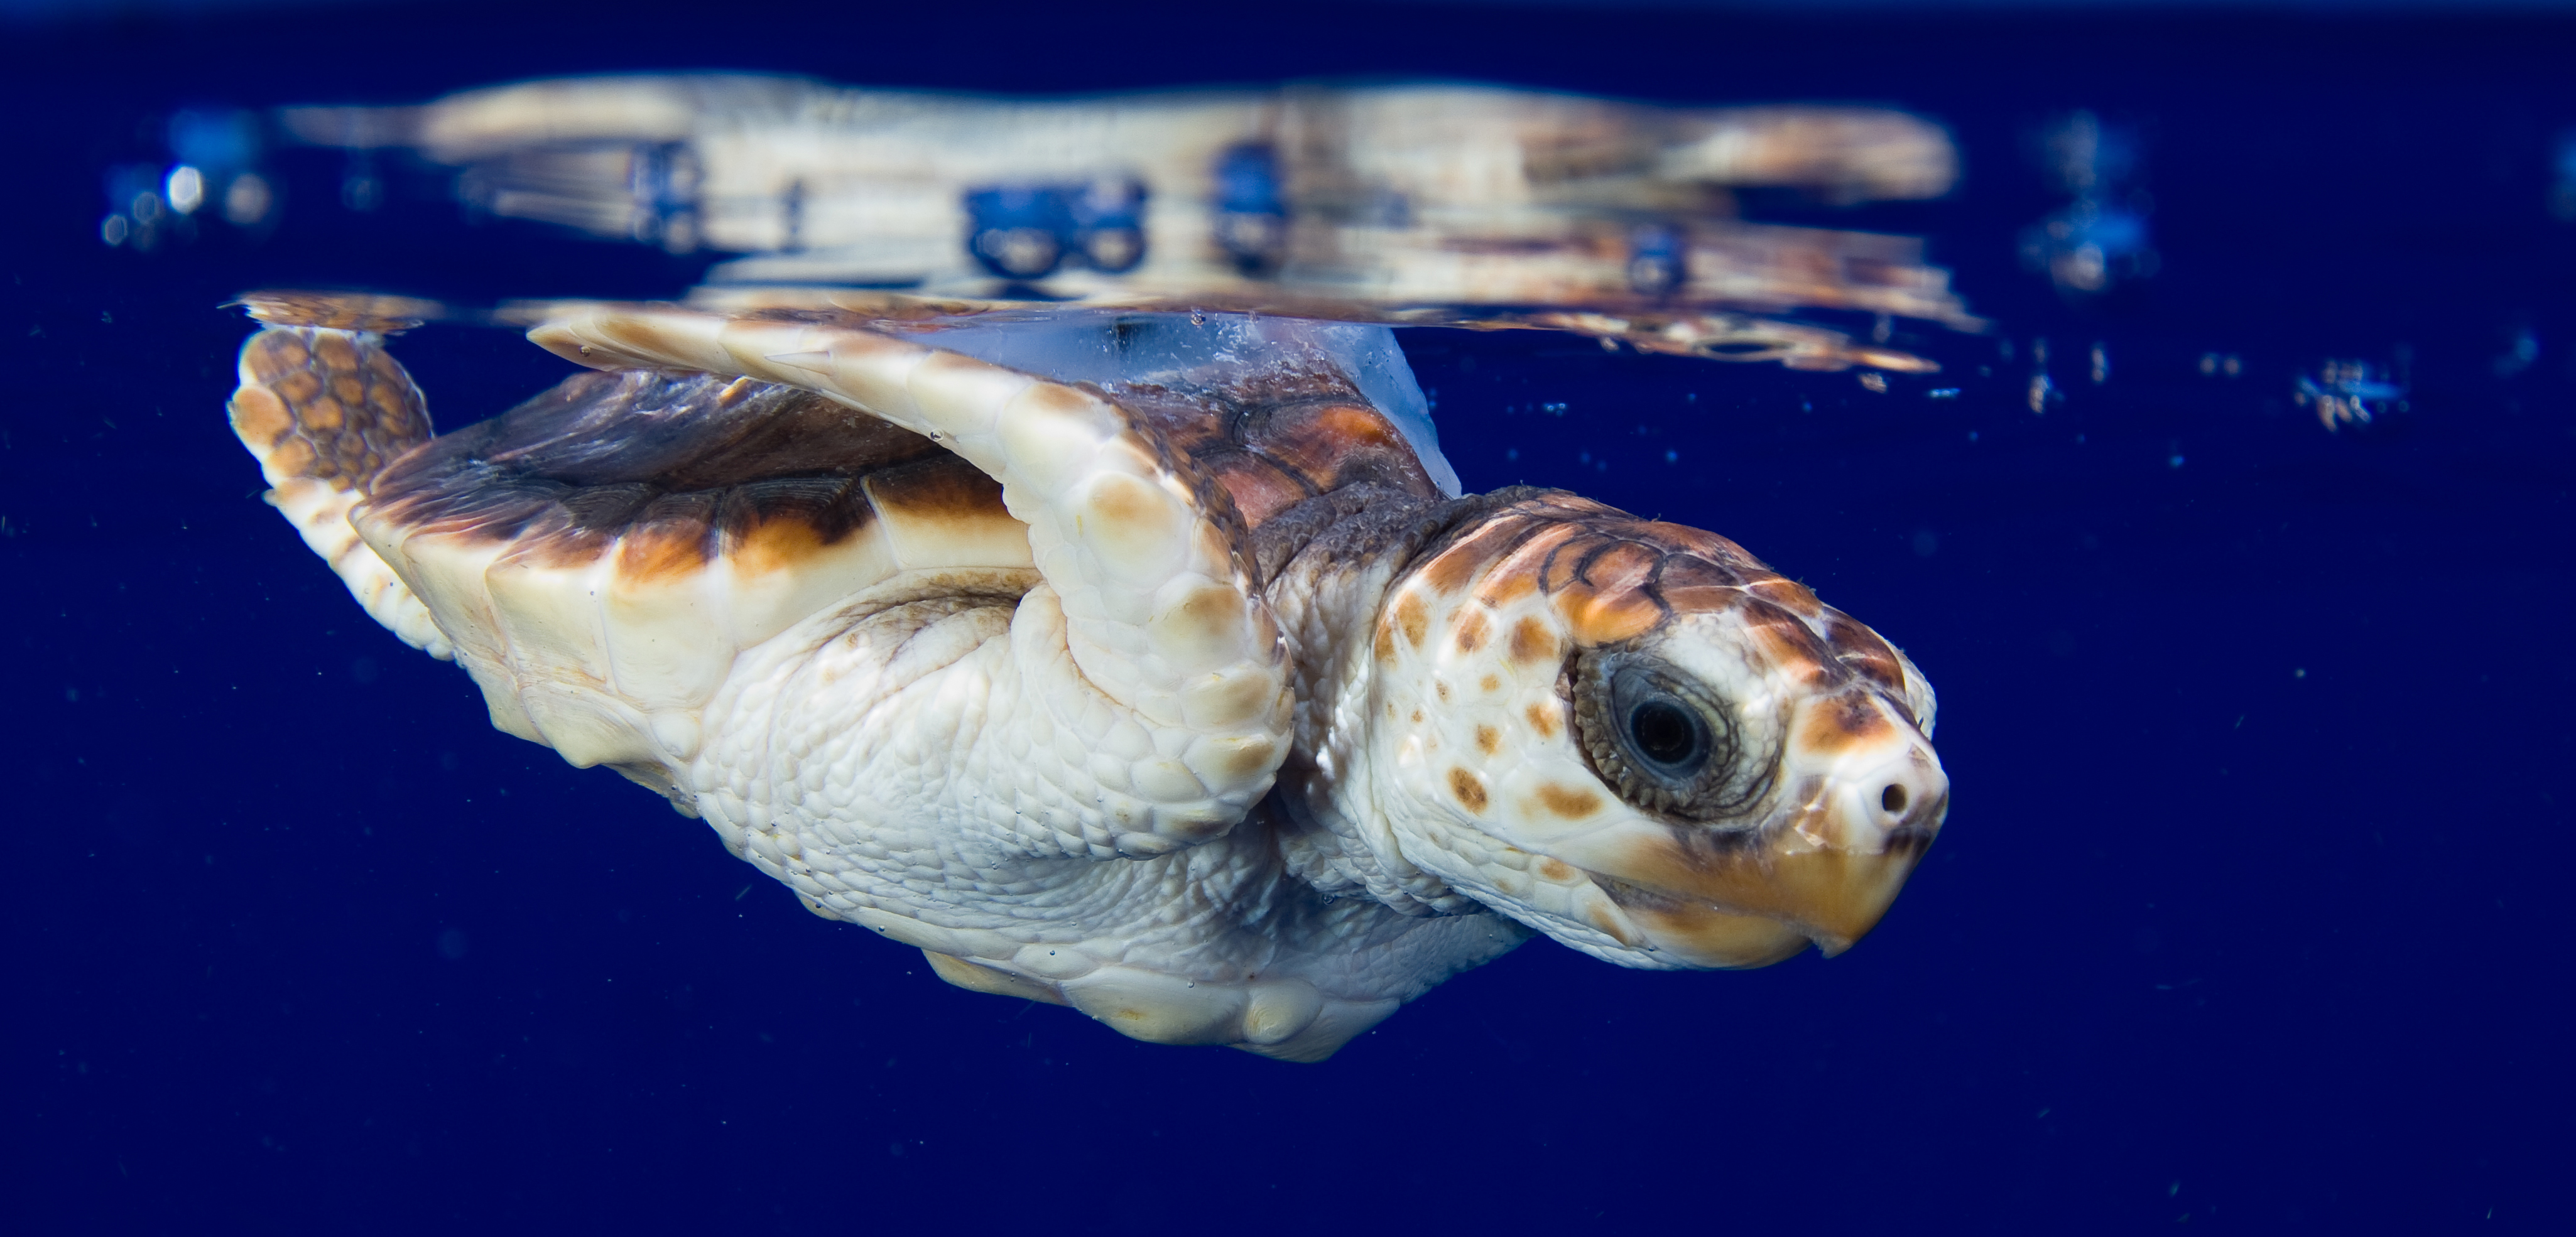 A baby sea turtle swims in the Gulf of Mexico. Photo by the University of Central Florida